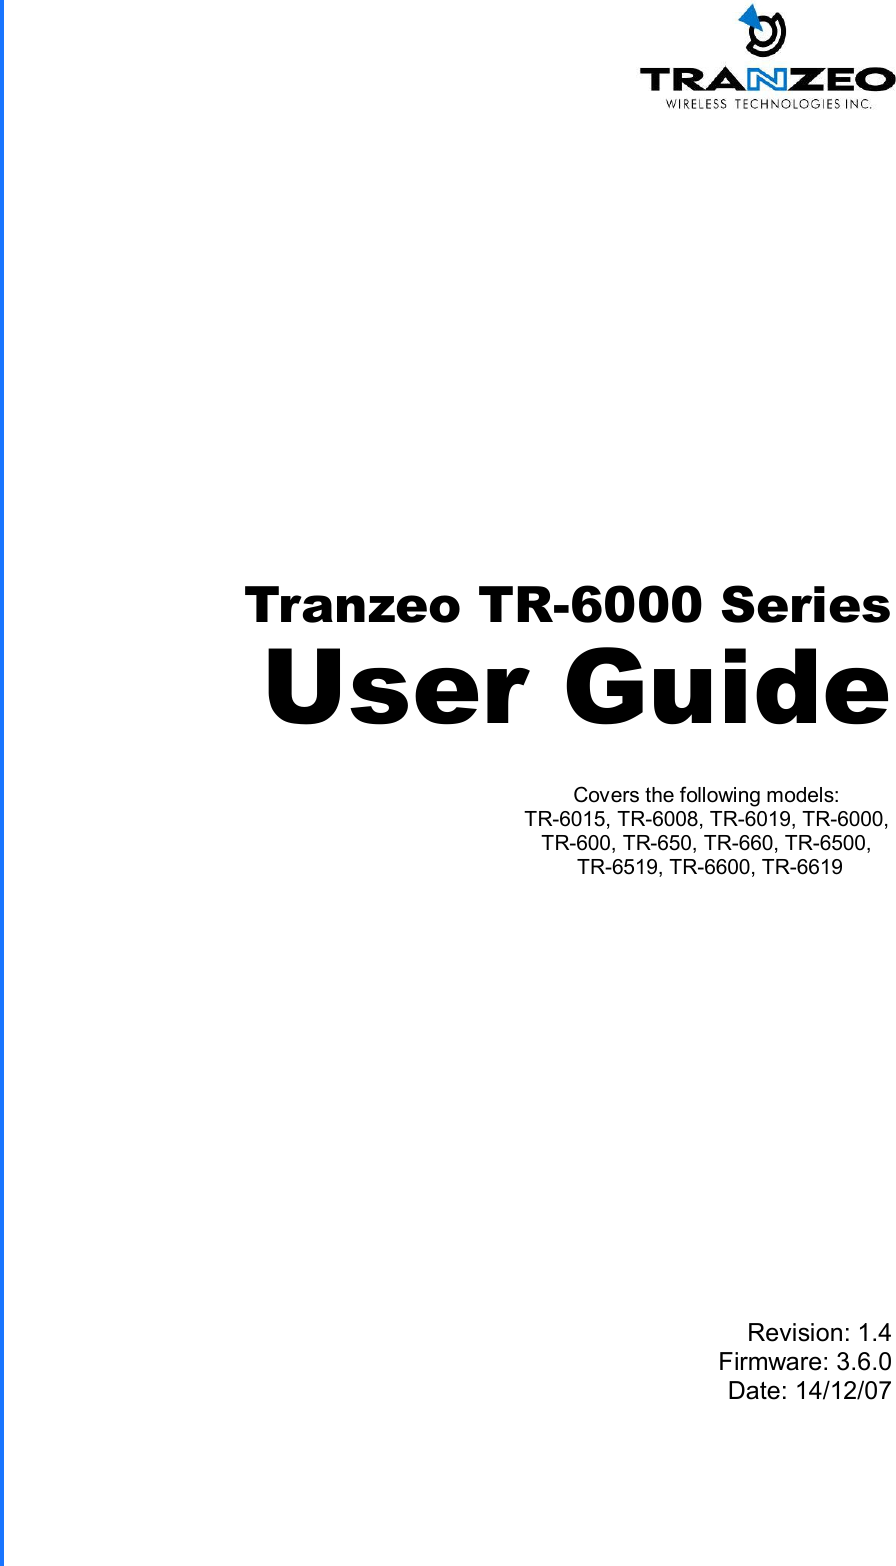  TRANZEO TR-6000 Revision: 1.4 Firmware: 3.6.0 Date: 14/12/07 Tranzeo TR-6000 Series User Guide Covers the following models:   TR-6015, TR-6008, TR-6019, TR-6000,  TR-600, TR-650, TR-660, TR-6500,  TR-6519, TR-6600, TR-6619 